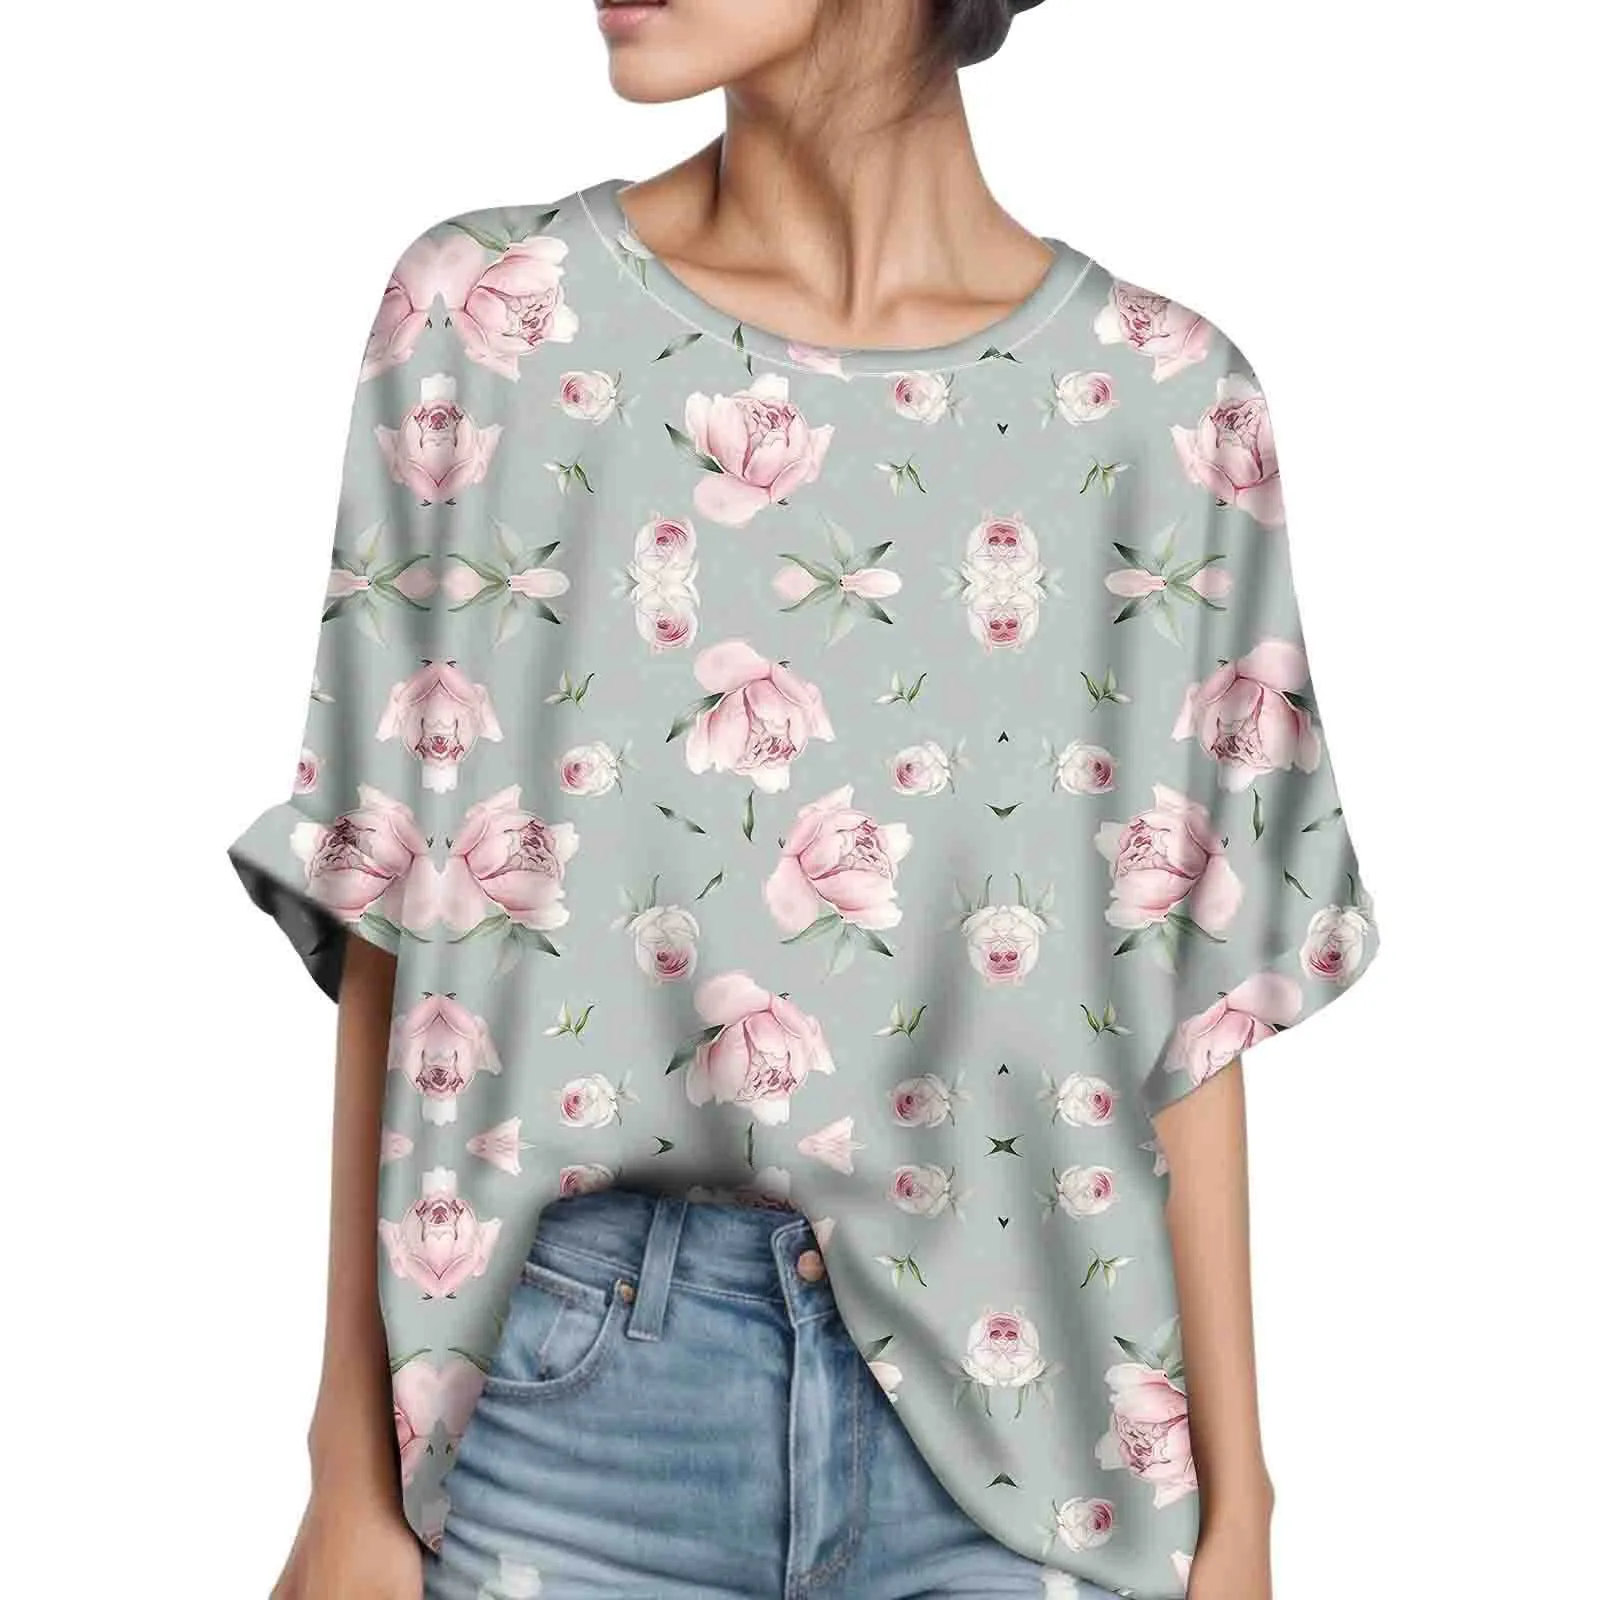 Floral Print Batwing Sleeve Blouses Women Summer Fashion Loose Tunic Shirts Vintage Casual Shirts O Neck Pullover Tops Блузки